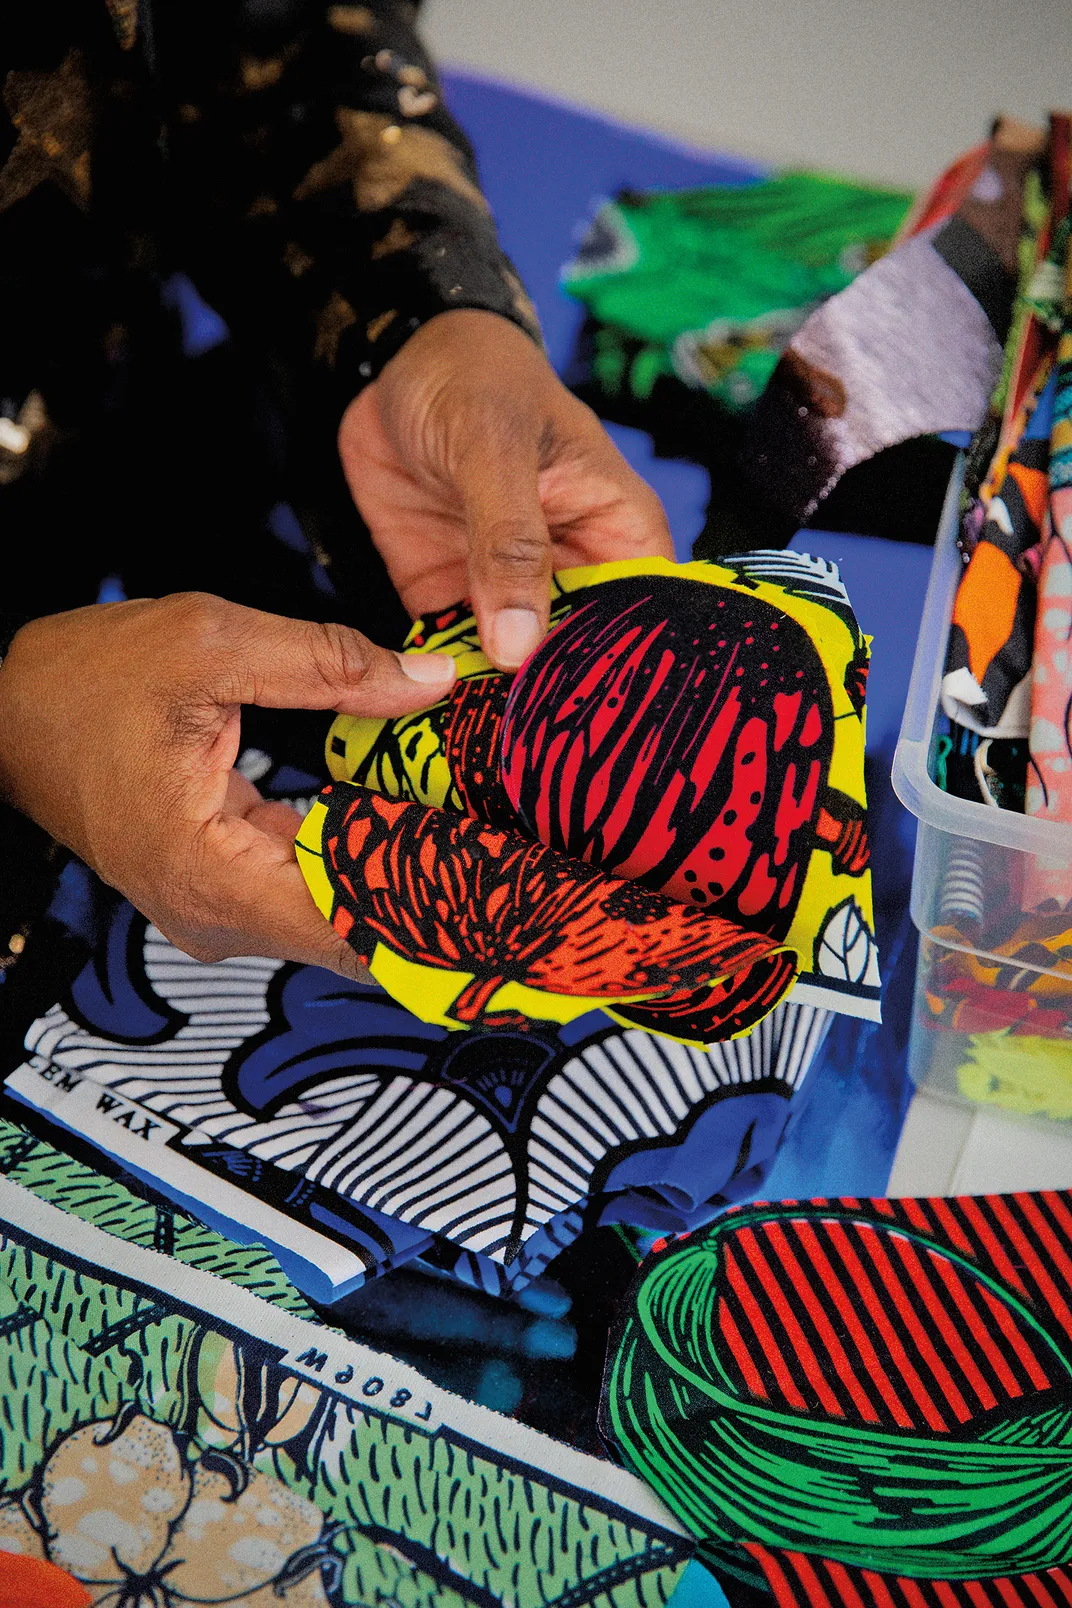 a close up detail of patterns made from fabric being held in a persons hands